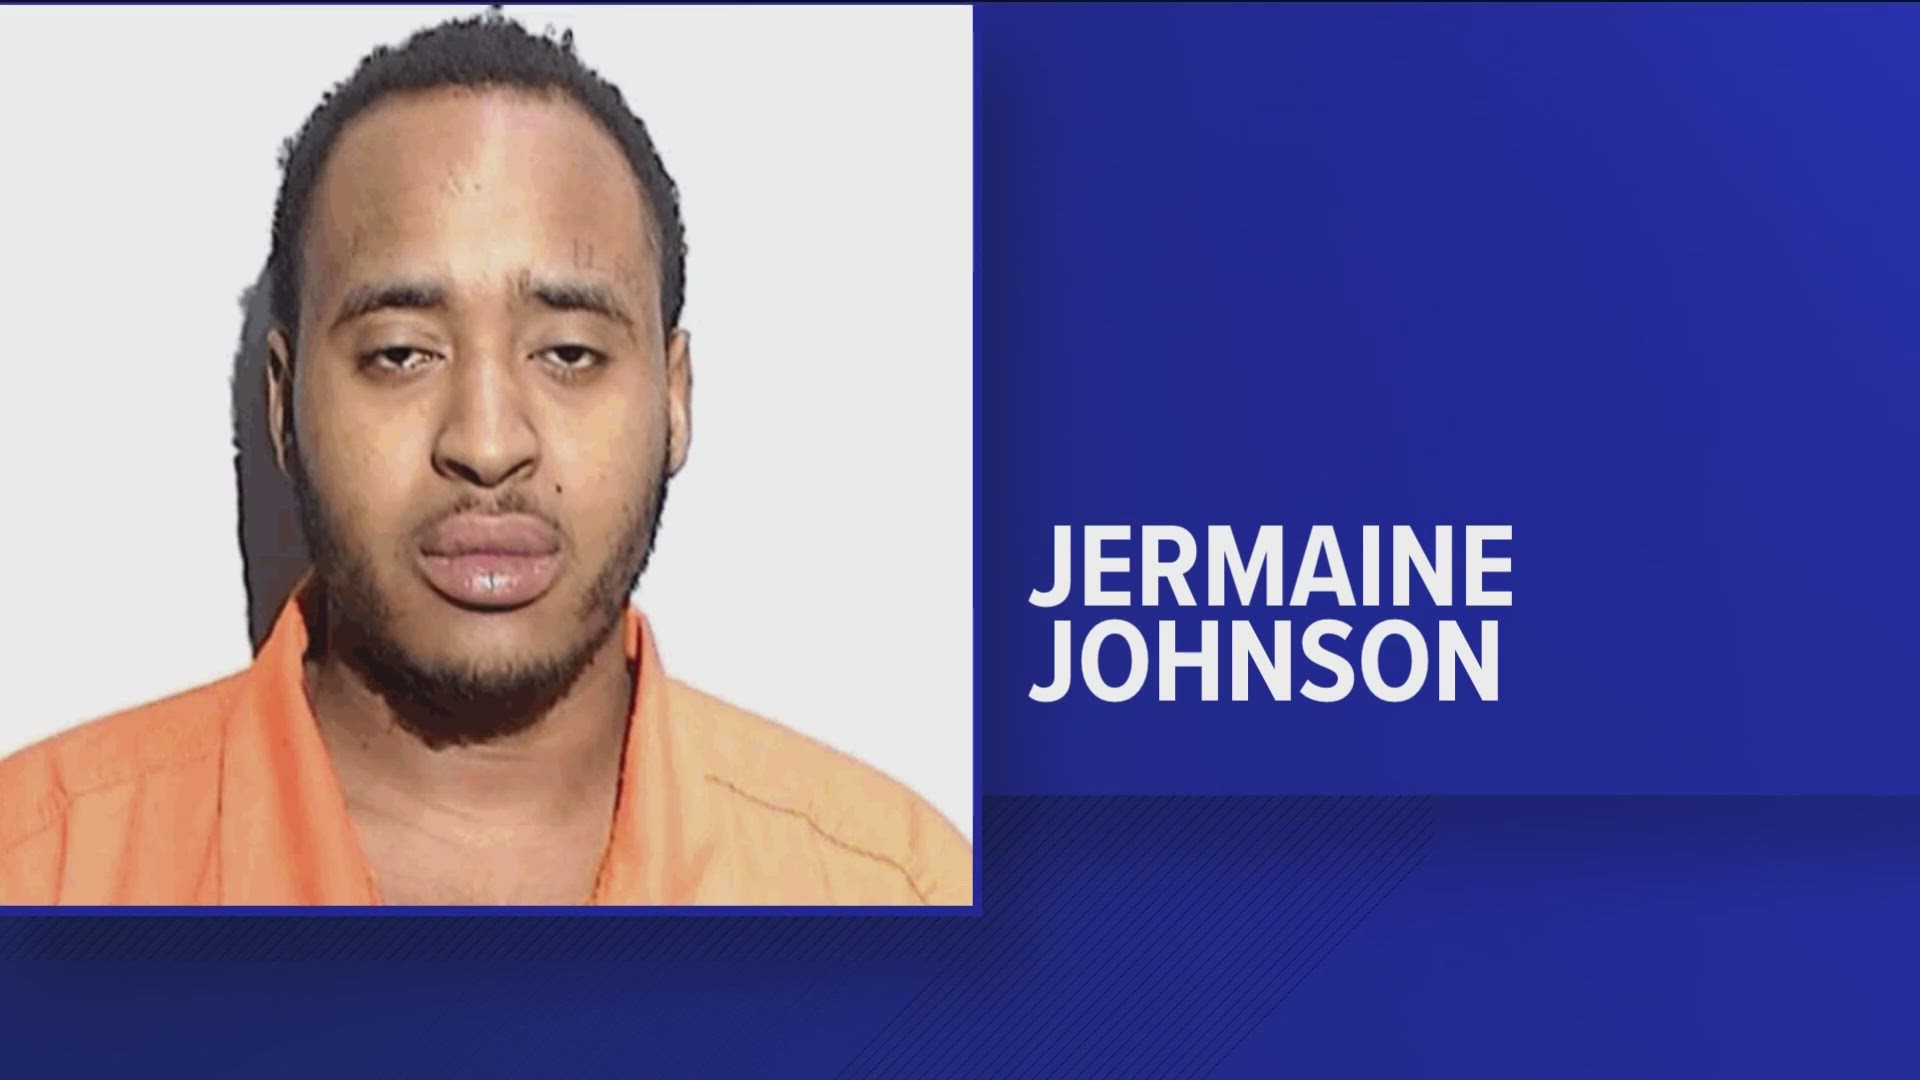 Two and a half months after the shooting of Terrance Green, TPD arrested Jermaine Johnson in south Toledo on Feb. 29.